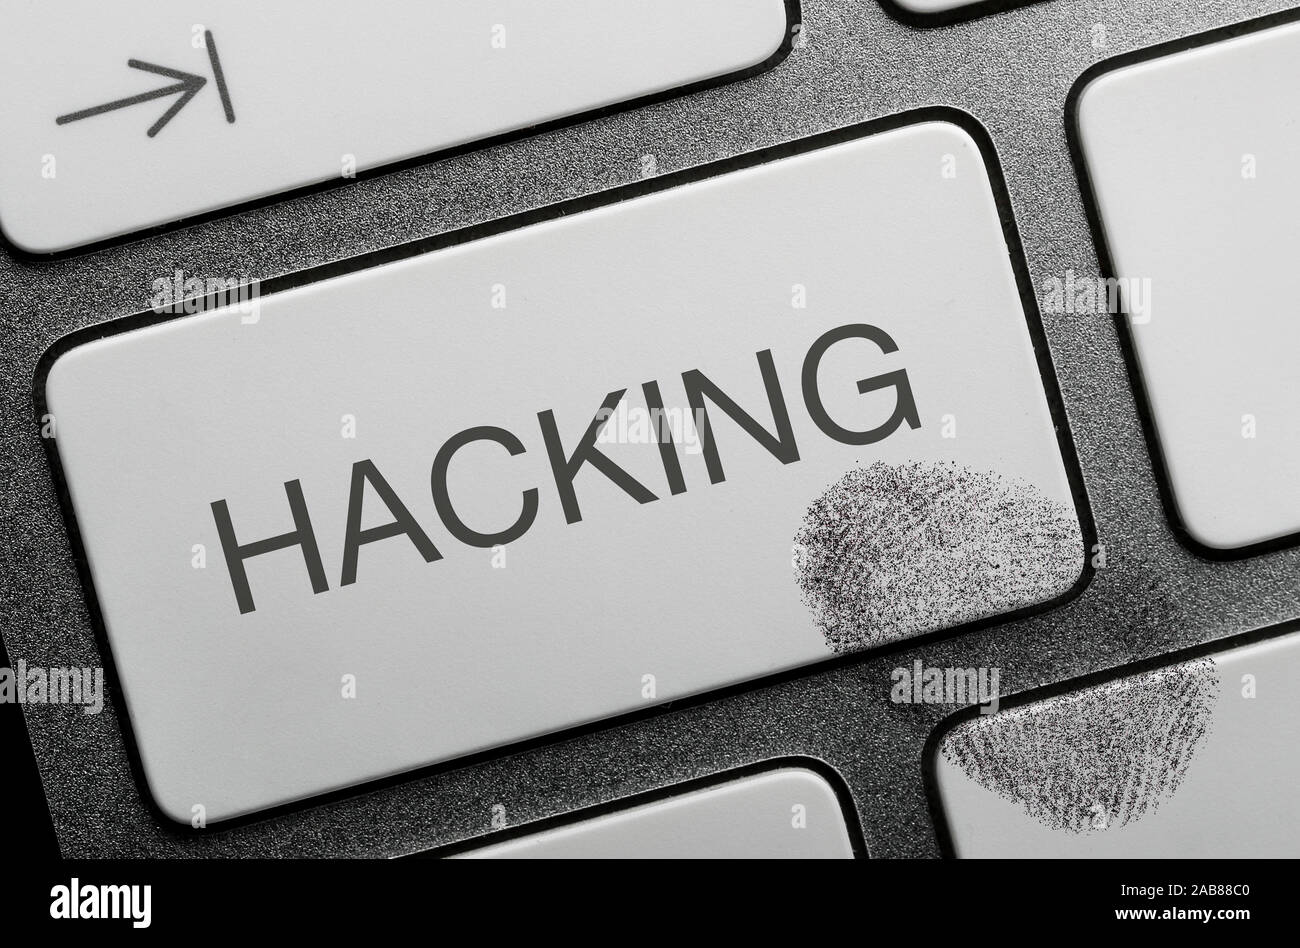 Concept internet crime images, hacking Stock Photo